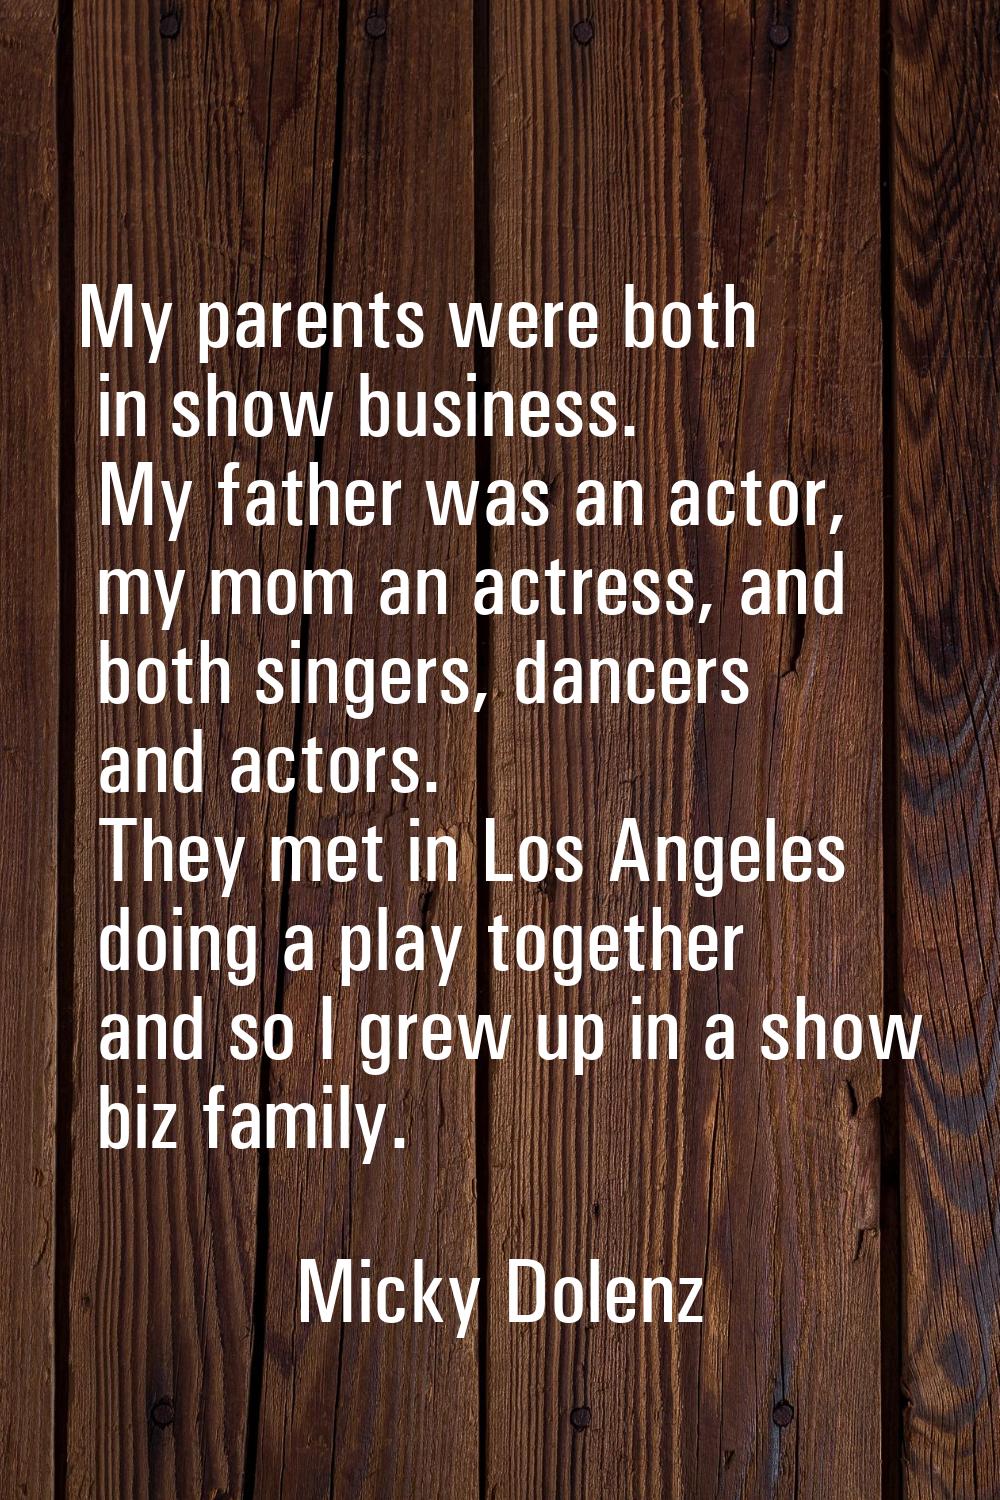 My parents were both in show business. My father was an actor, my mom an actress, and both singers,